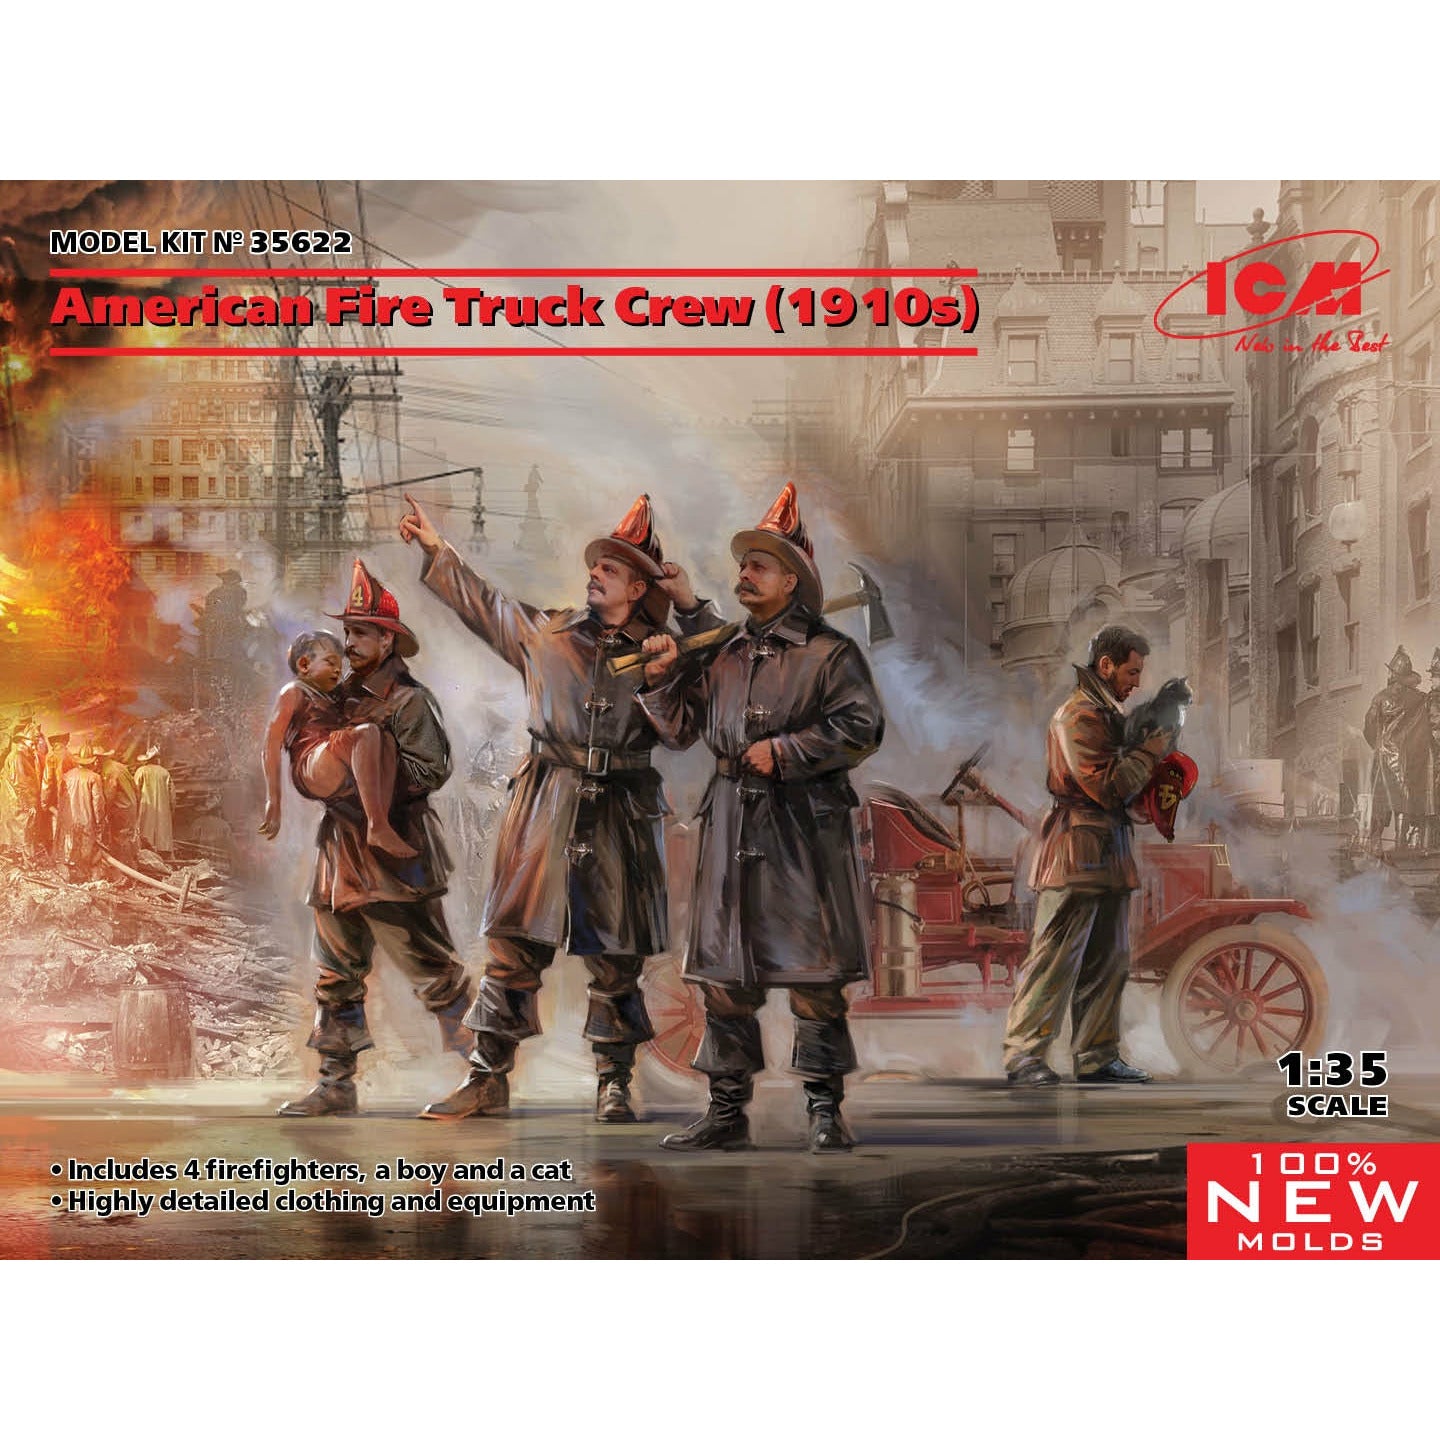 American Fire Truck Crew (1910s) (100% new molds) 1/35 #35622 by ICM